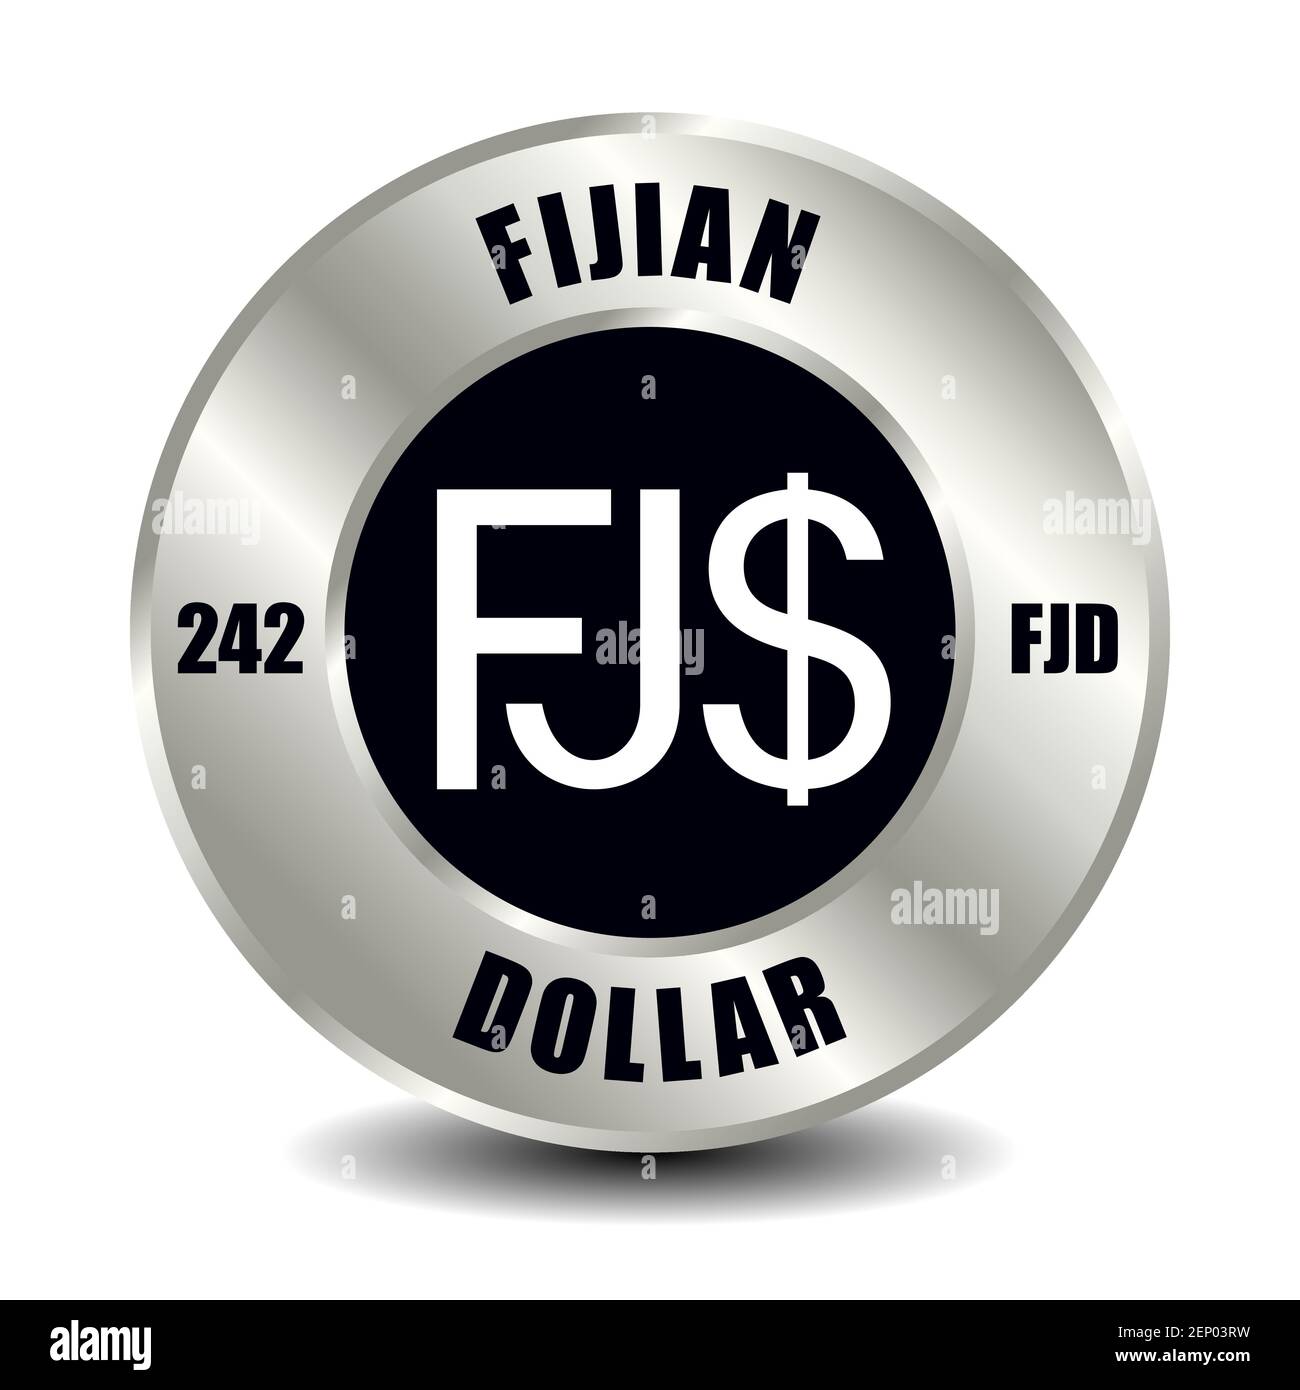 Fiji money icon isolated on round silver coin. Vector sign of currency symbol with international ISO code and abbreviation Stock Vector